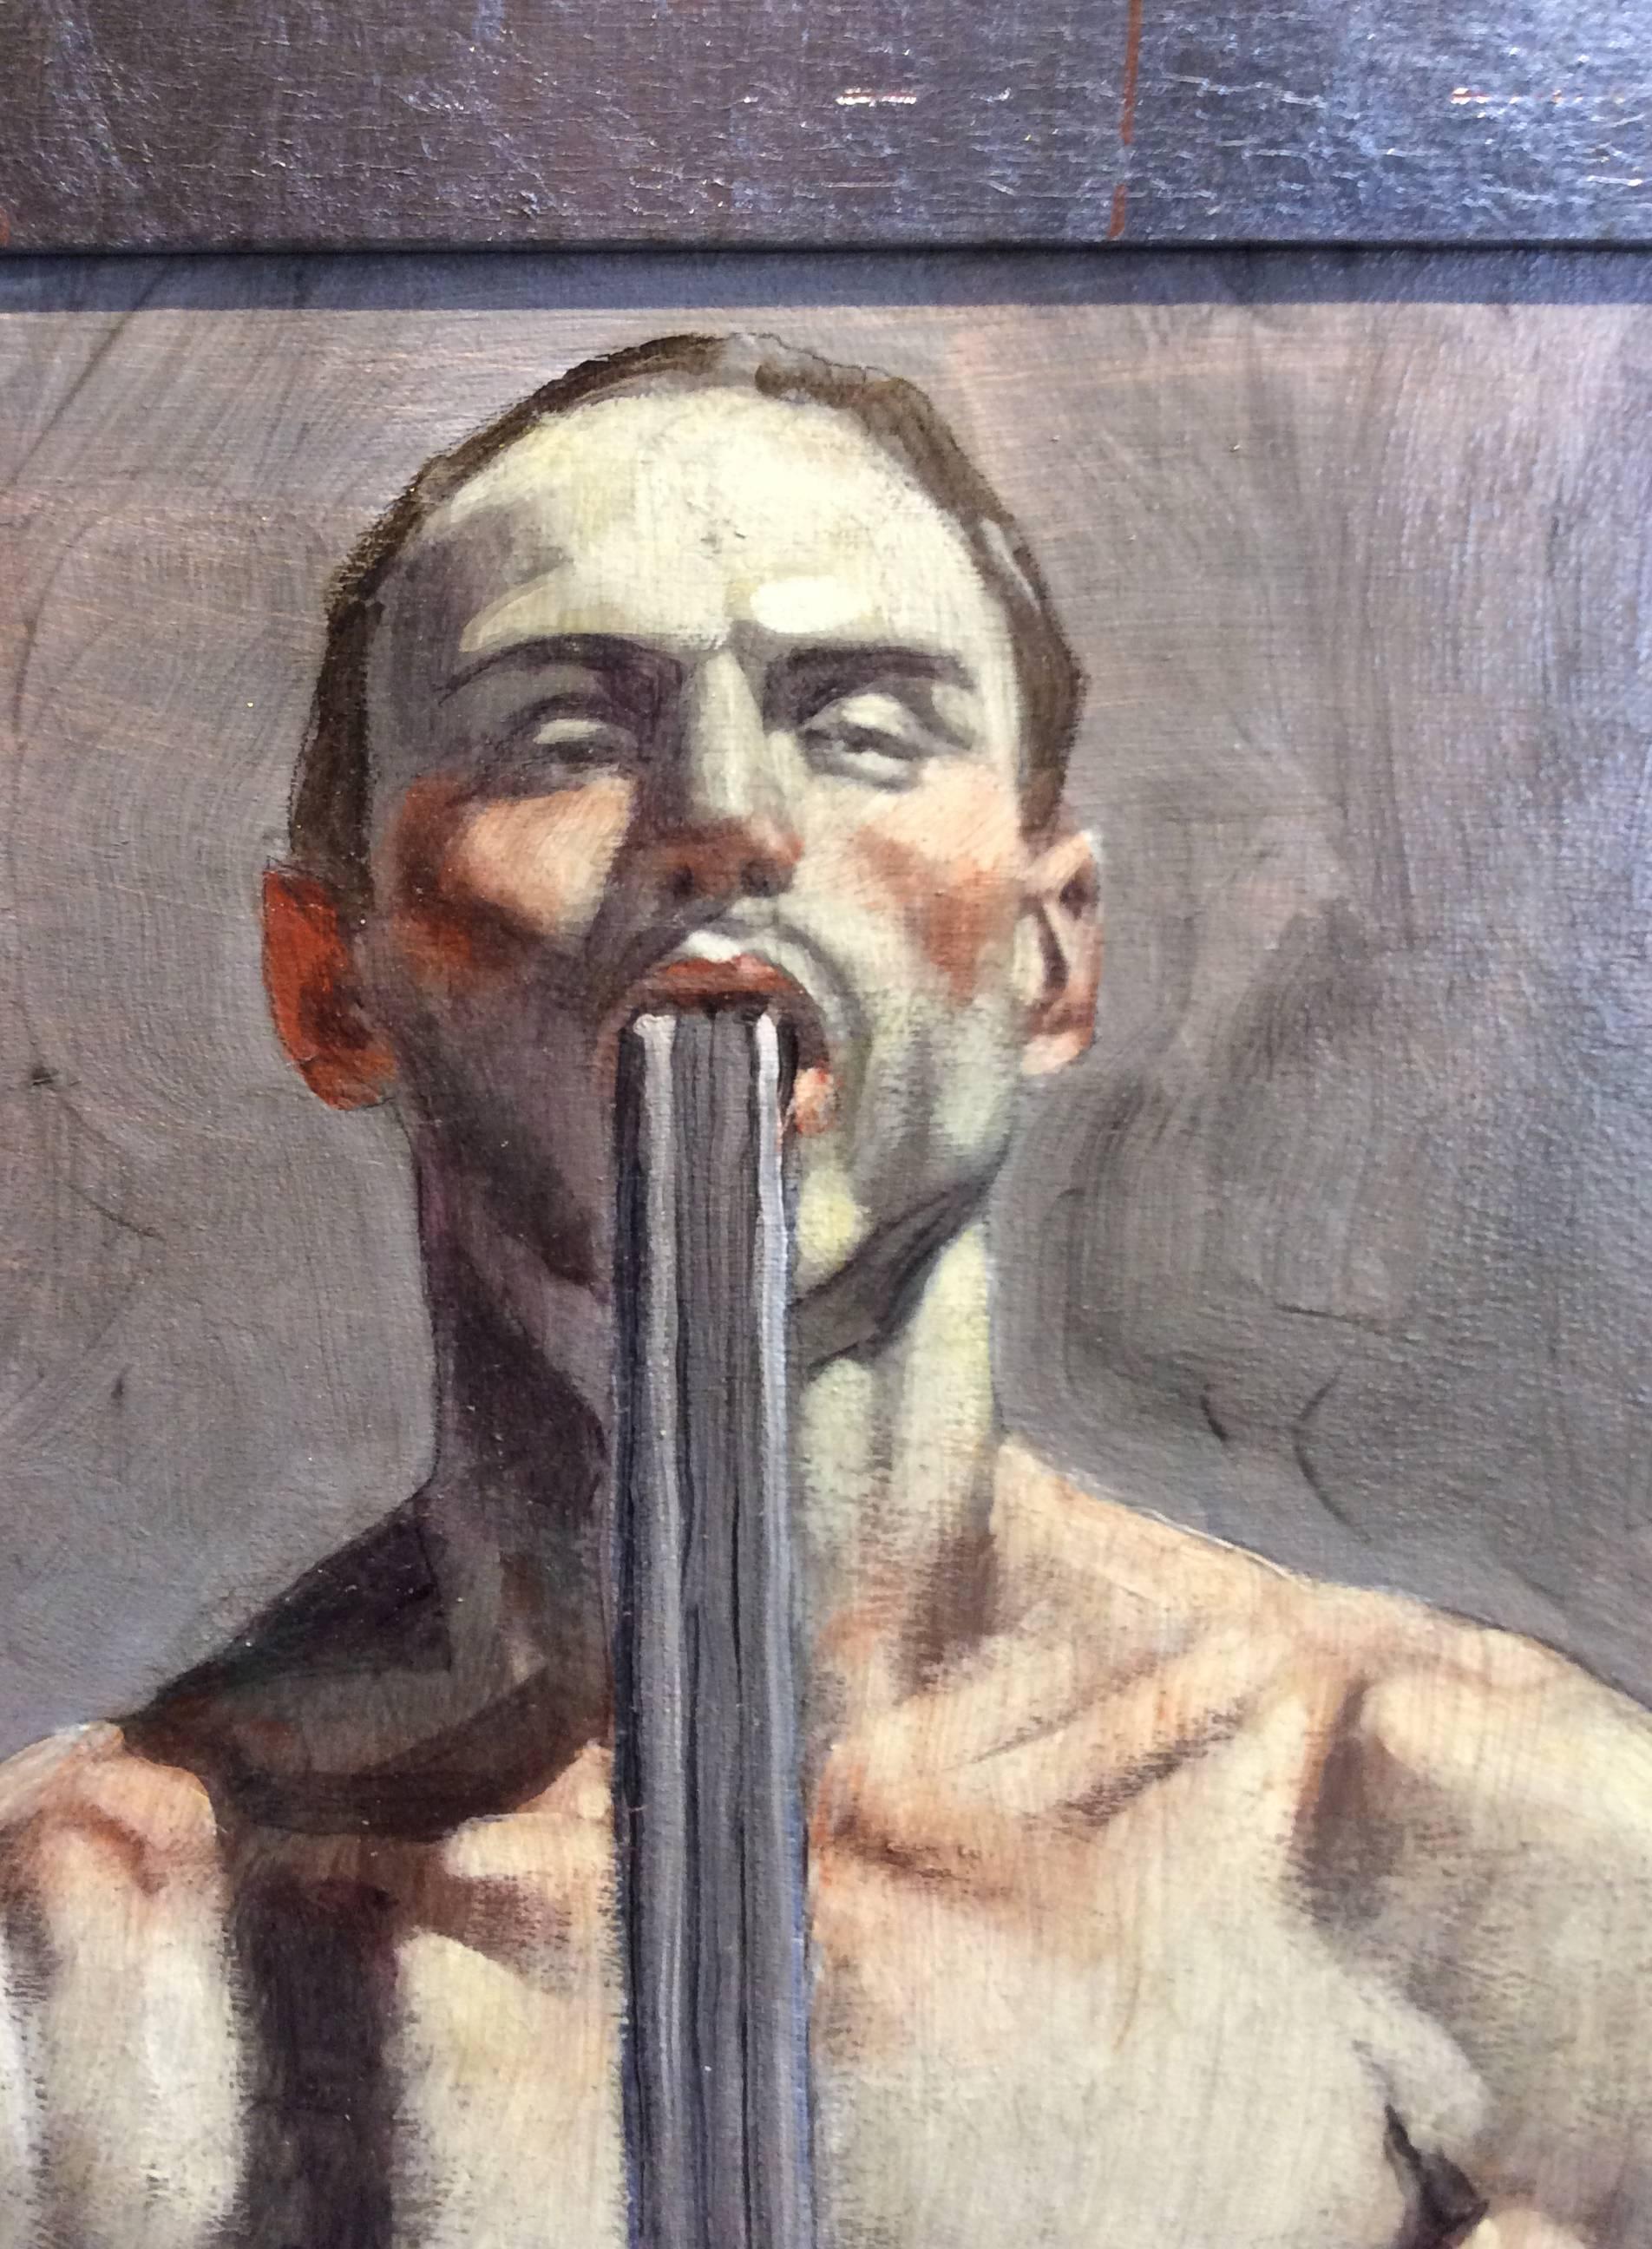 Armed with Rifle (Vertical Figurative Oil Painting of Nude Man with Rifle) - Gray Nude Painting by Mark Beard